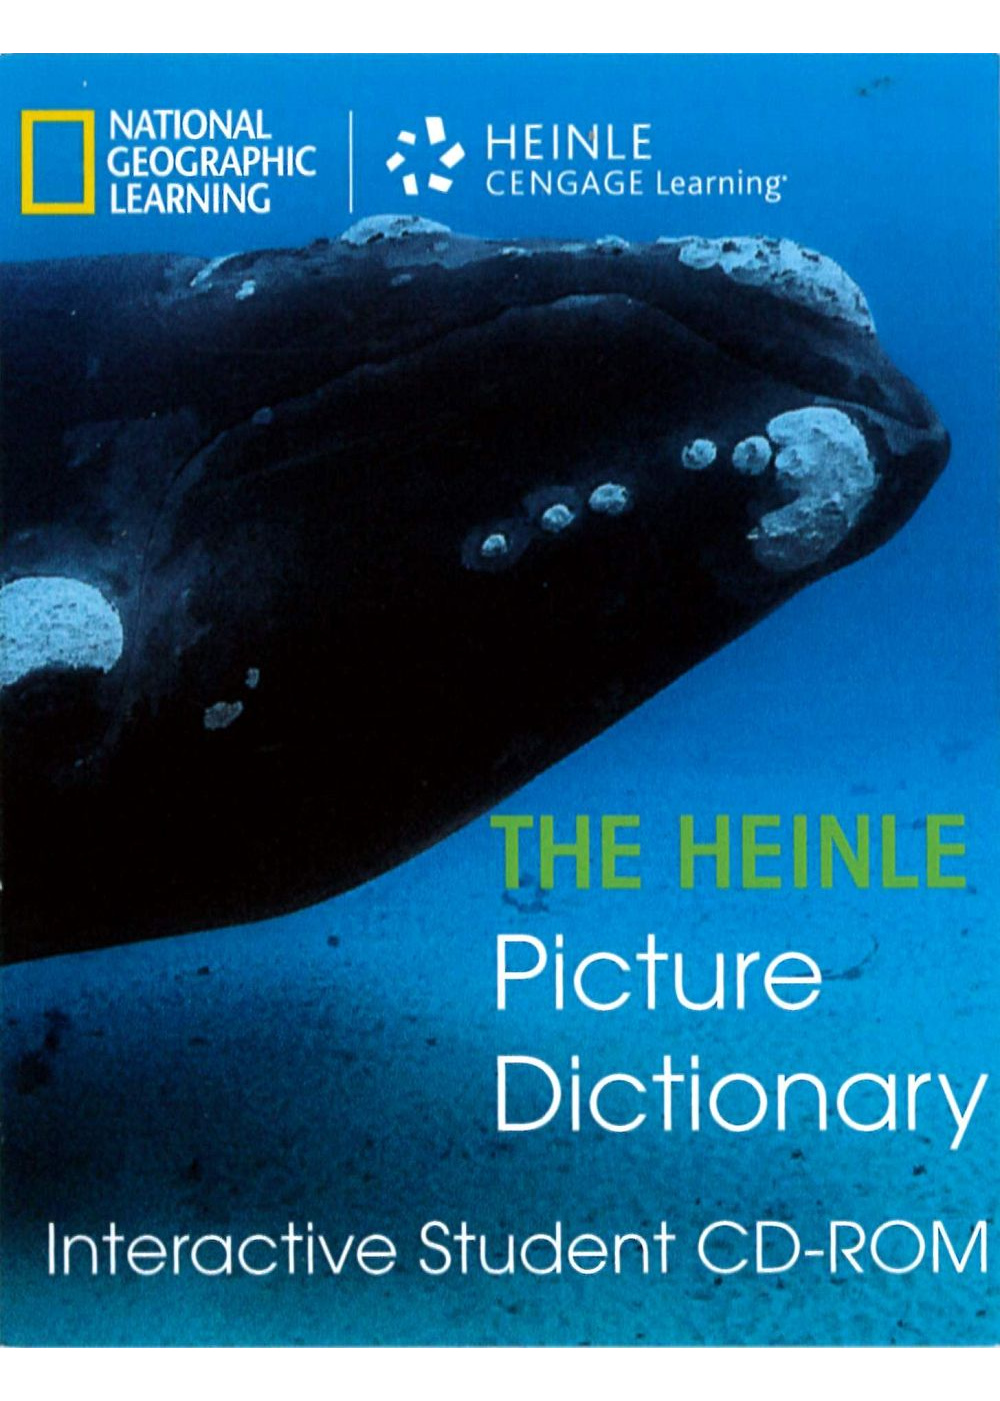 The Heinle Picture Dictionary ...